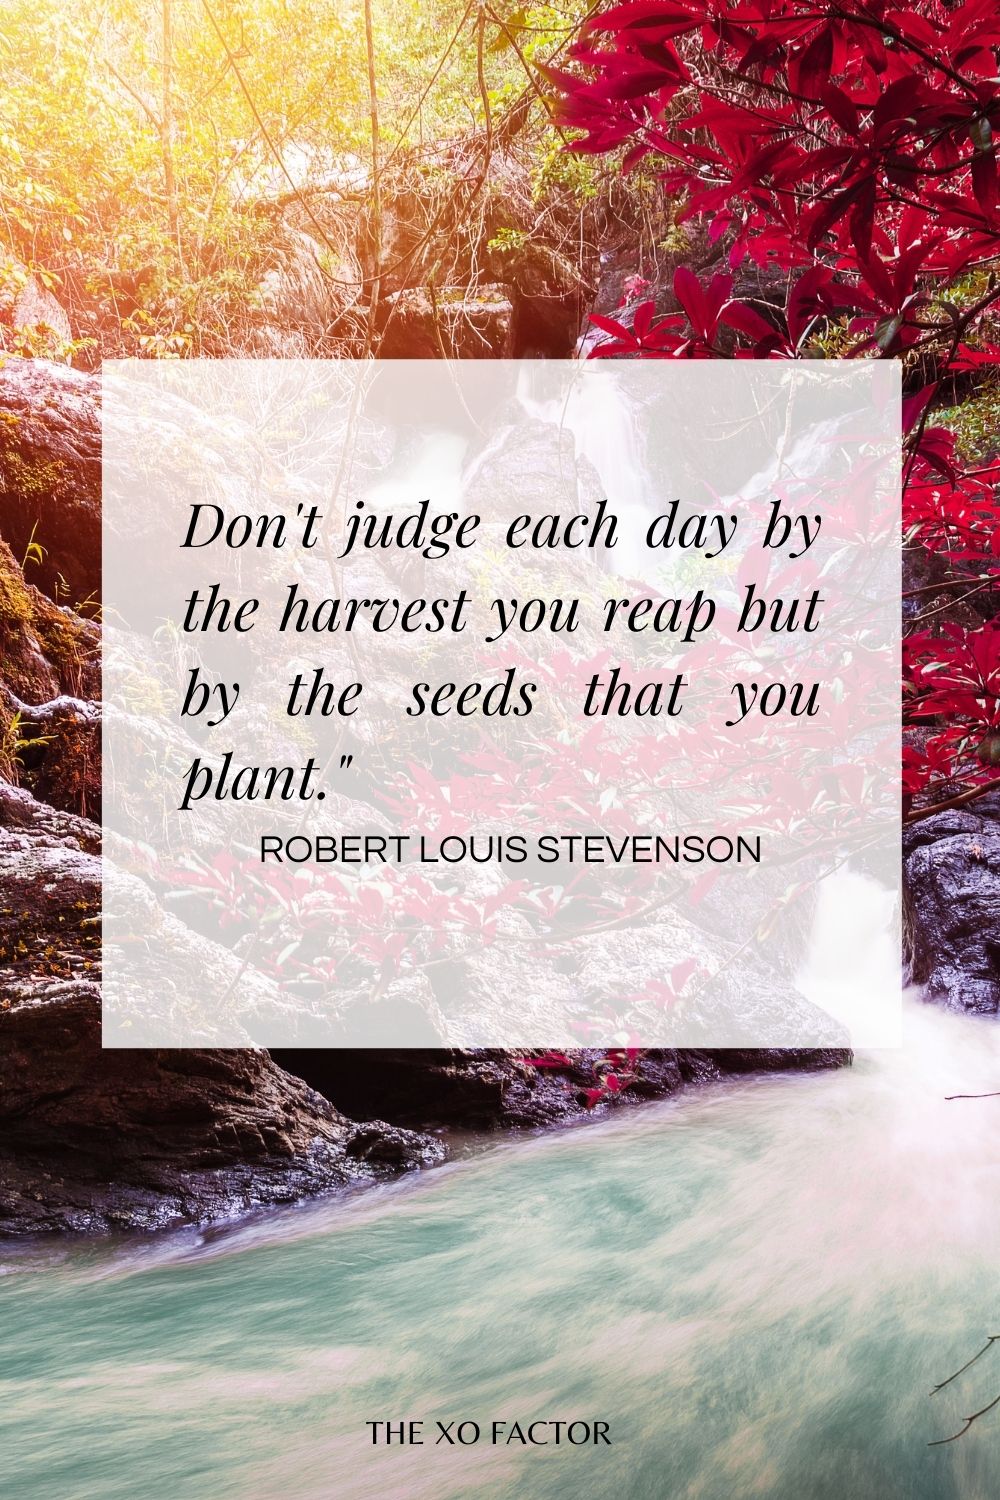 Don't judge each day by the harvest you reap but by the seeds that you plant."  Robert Louis Stevenson